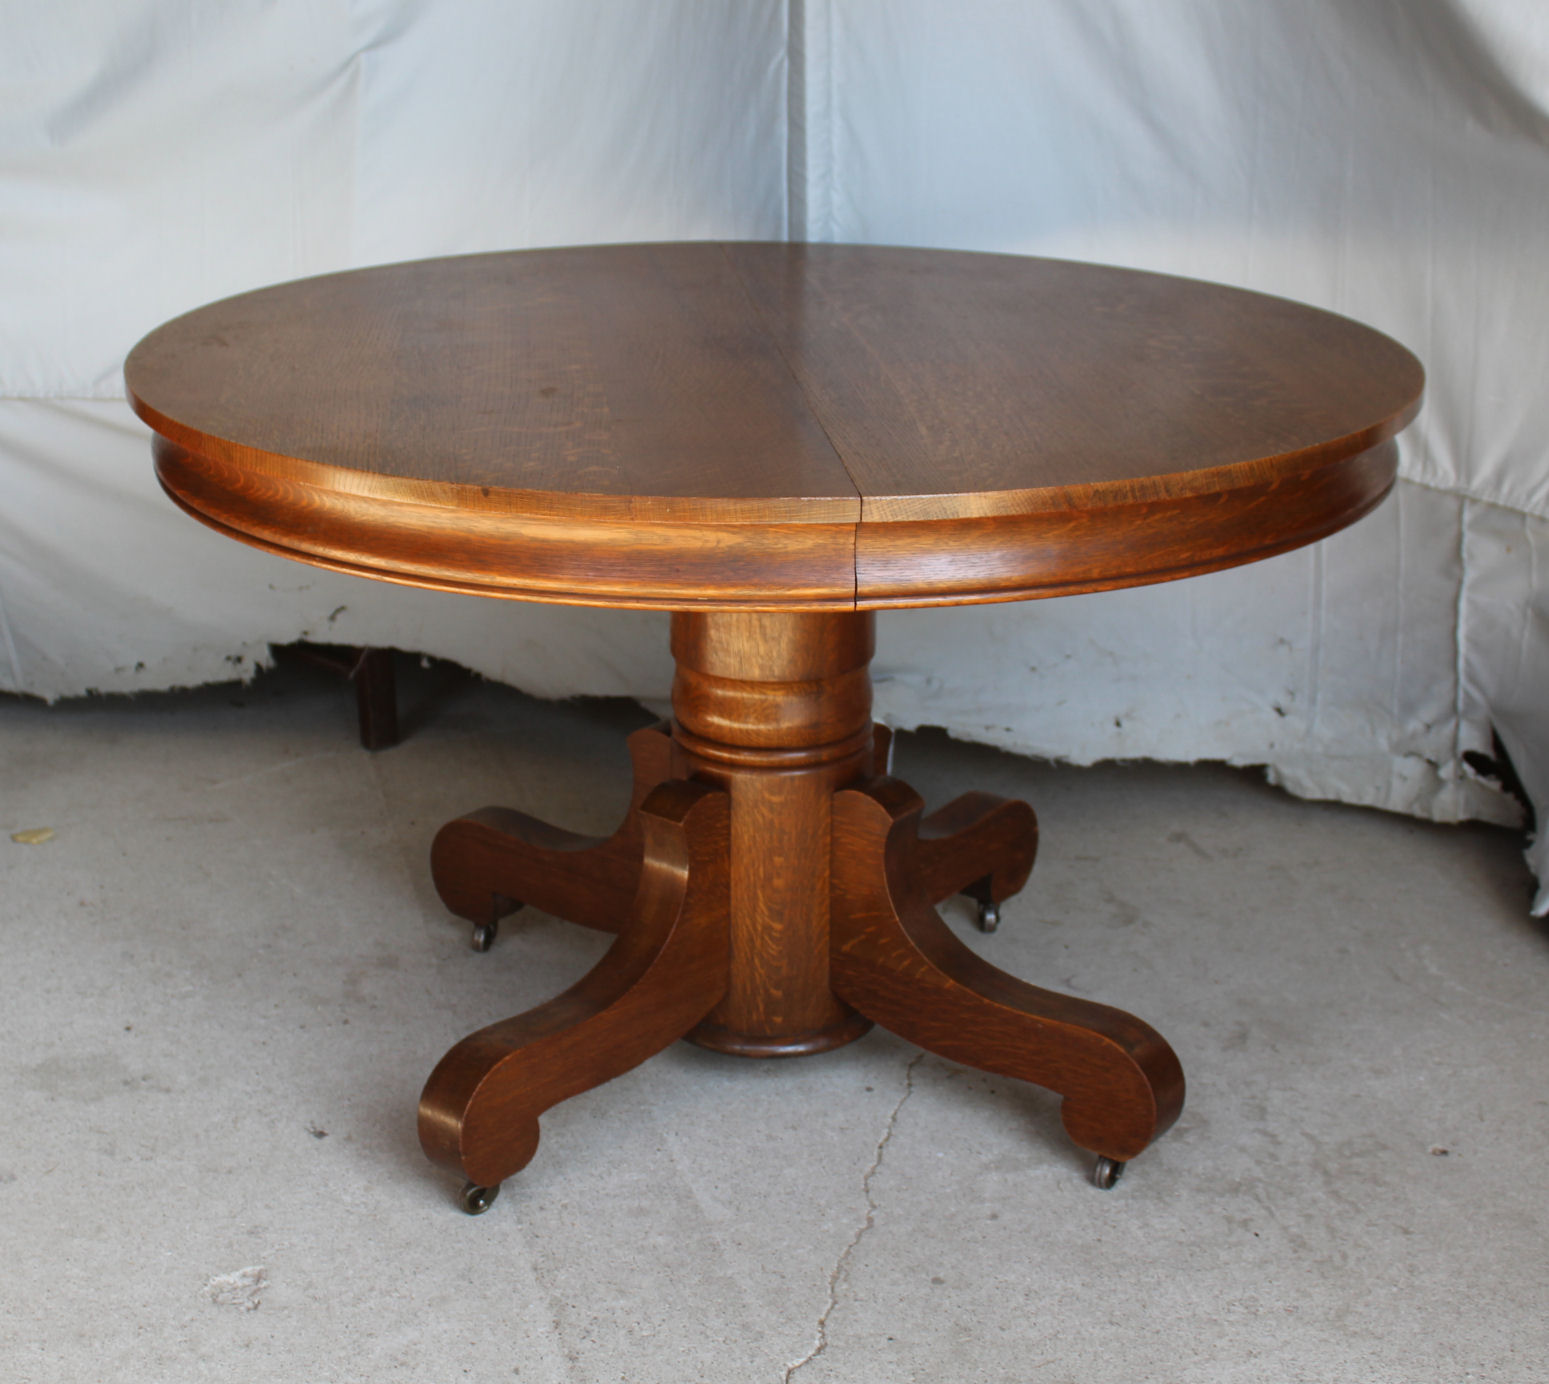 Antiques Antique Round Oak Table, 48 Round Oak Dining Table With Leaf